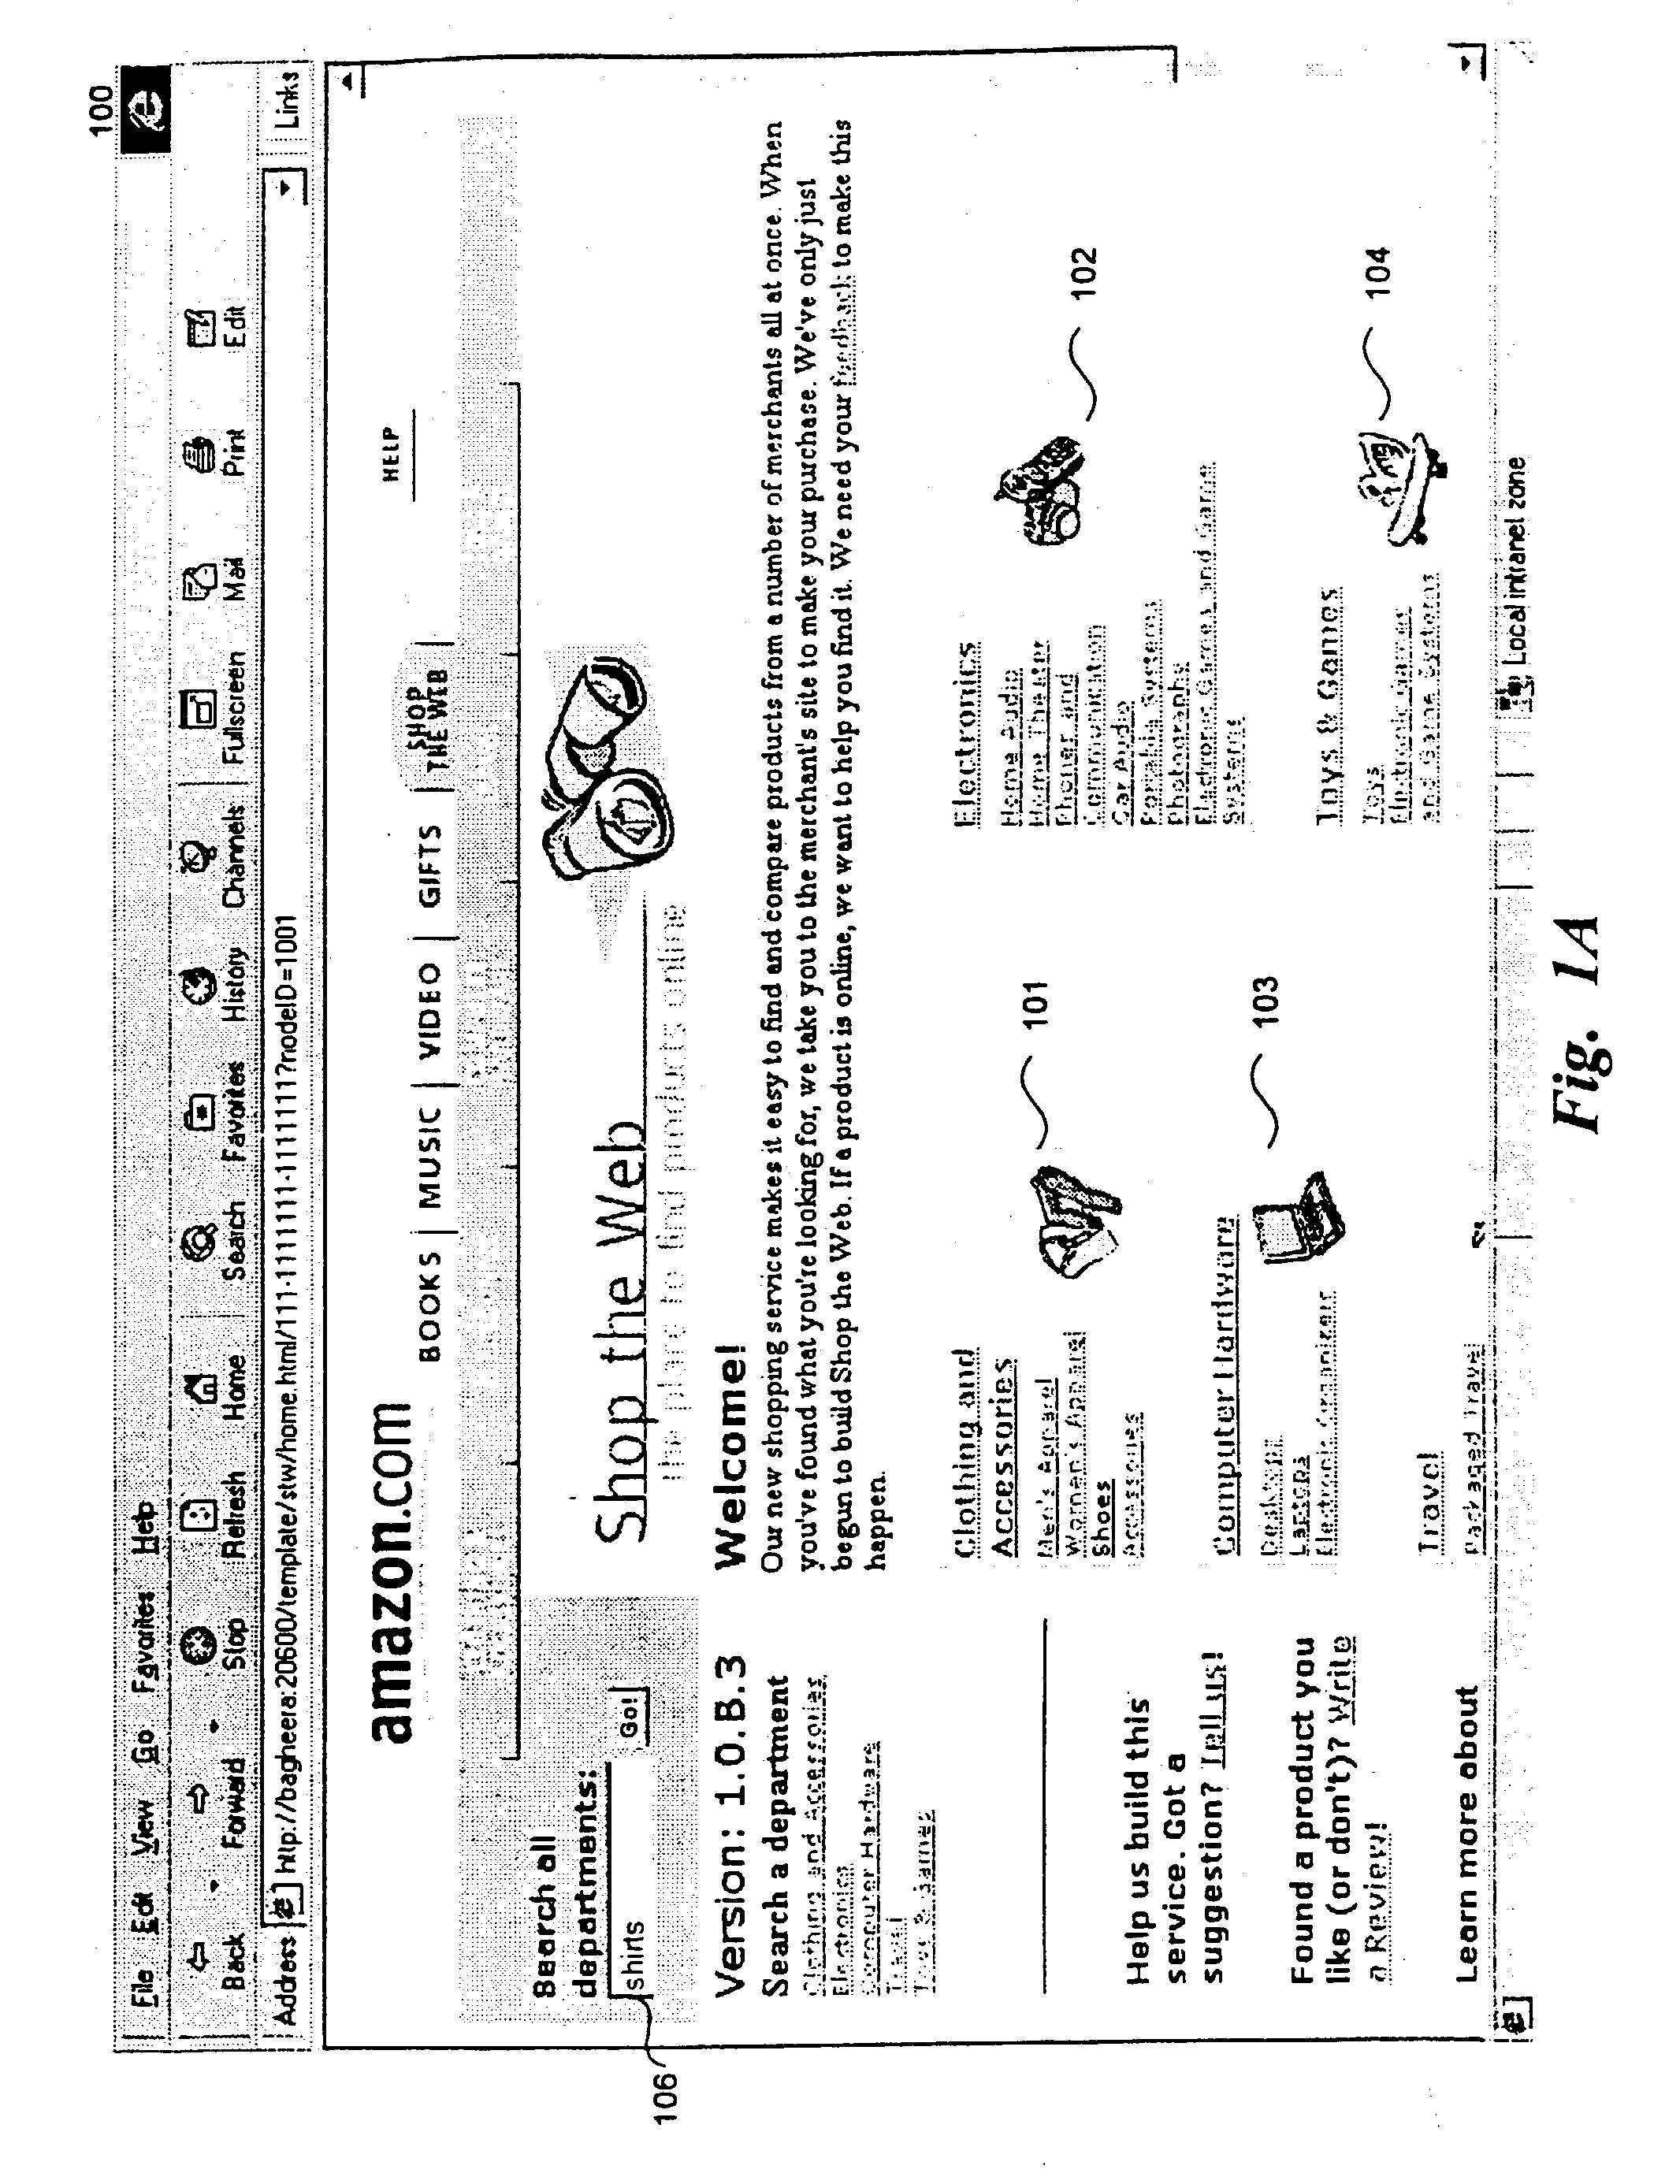 Method and system for generation of hierarchical search results